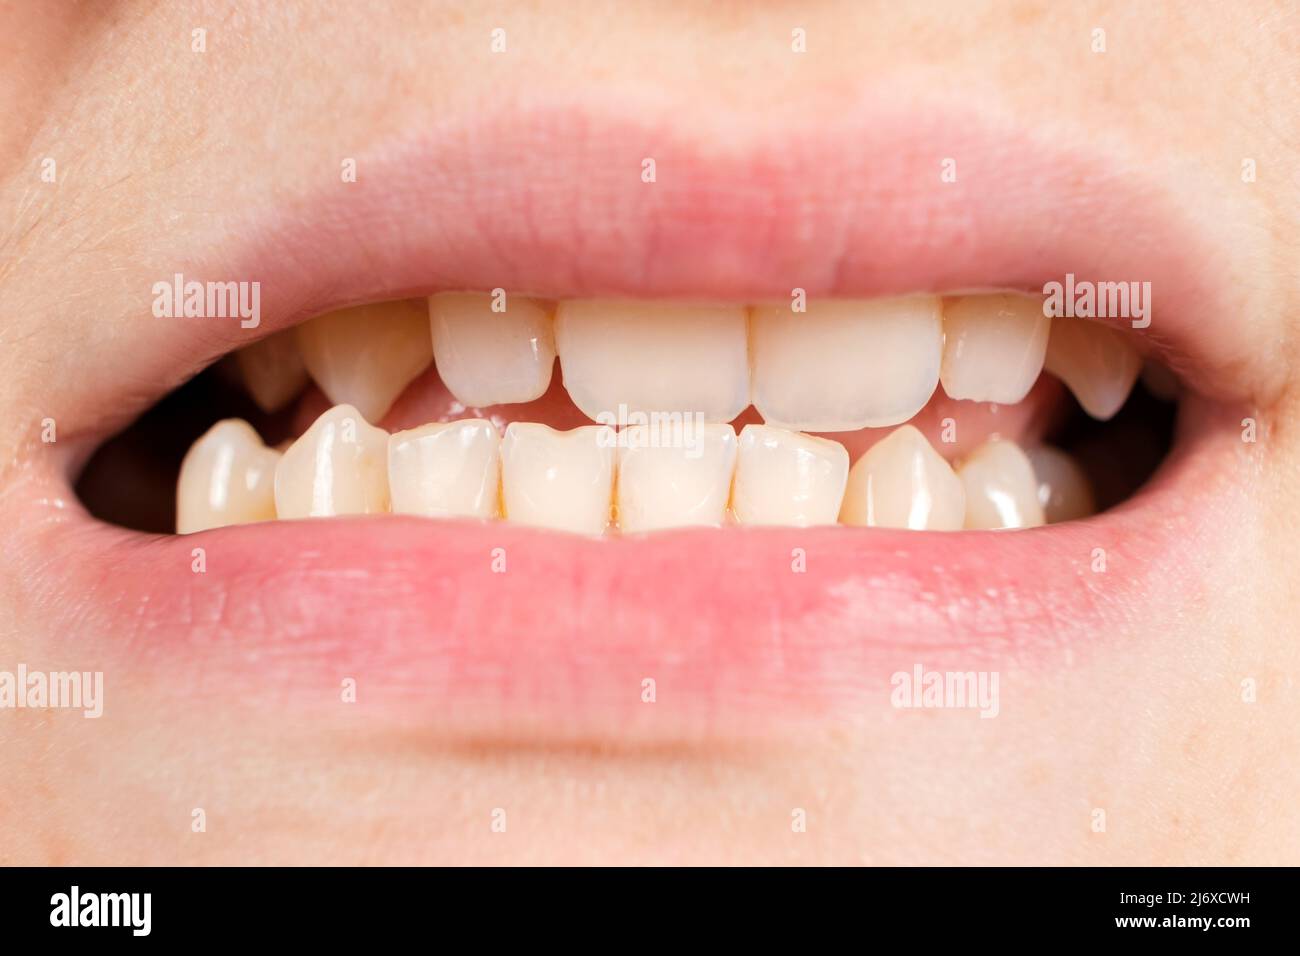 Patient with dislocated jaw and malocclusion, temporomandibular joint dysfunction, close-up. Stock Photo